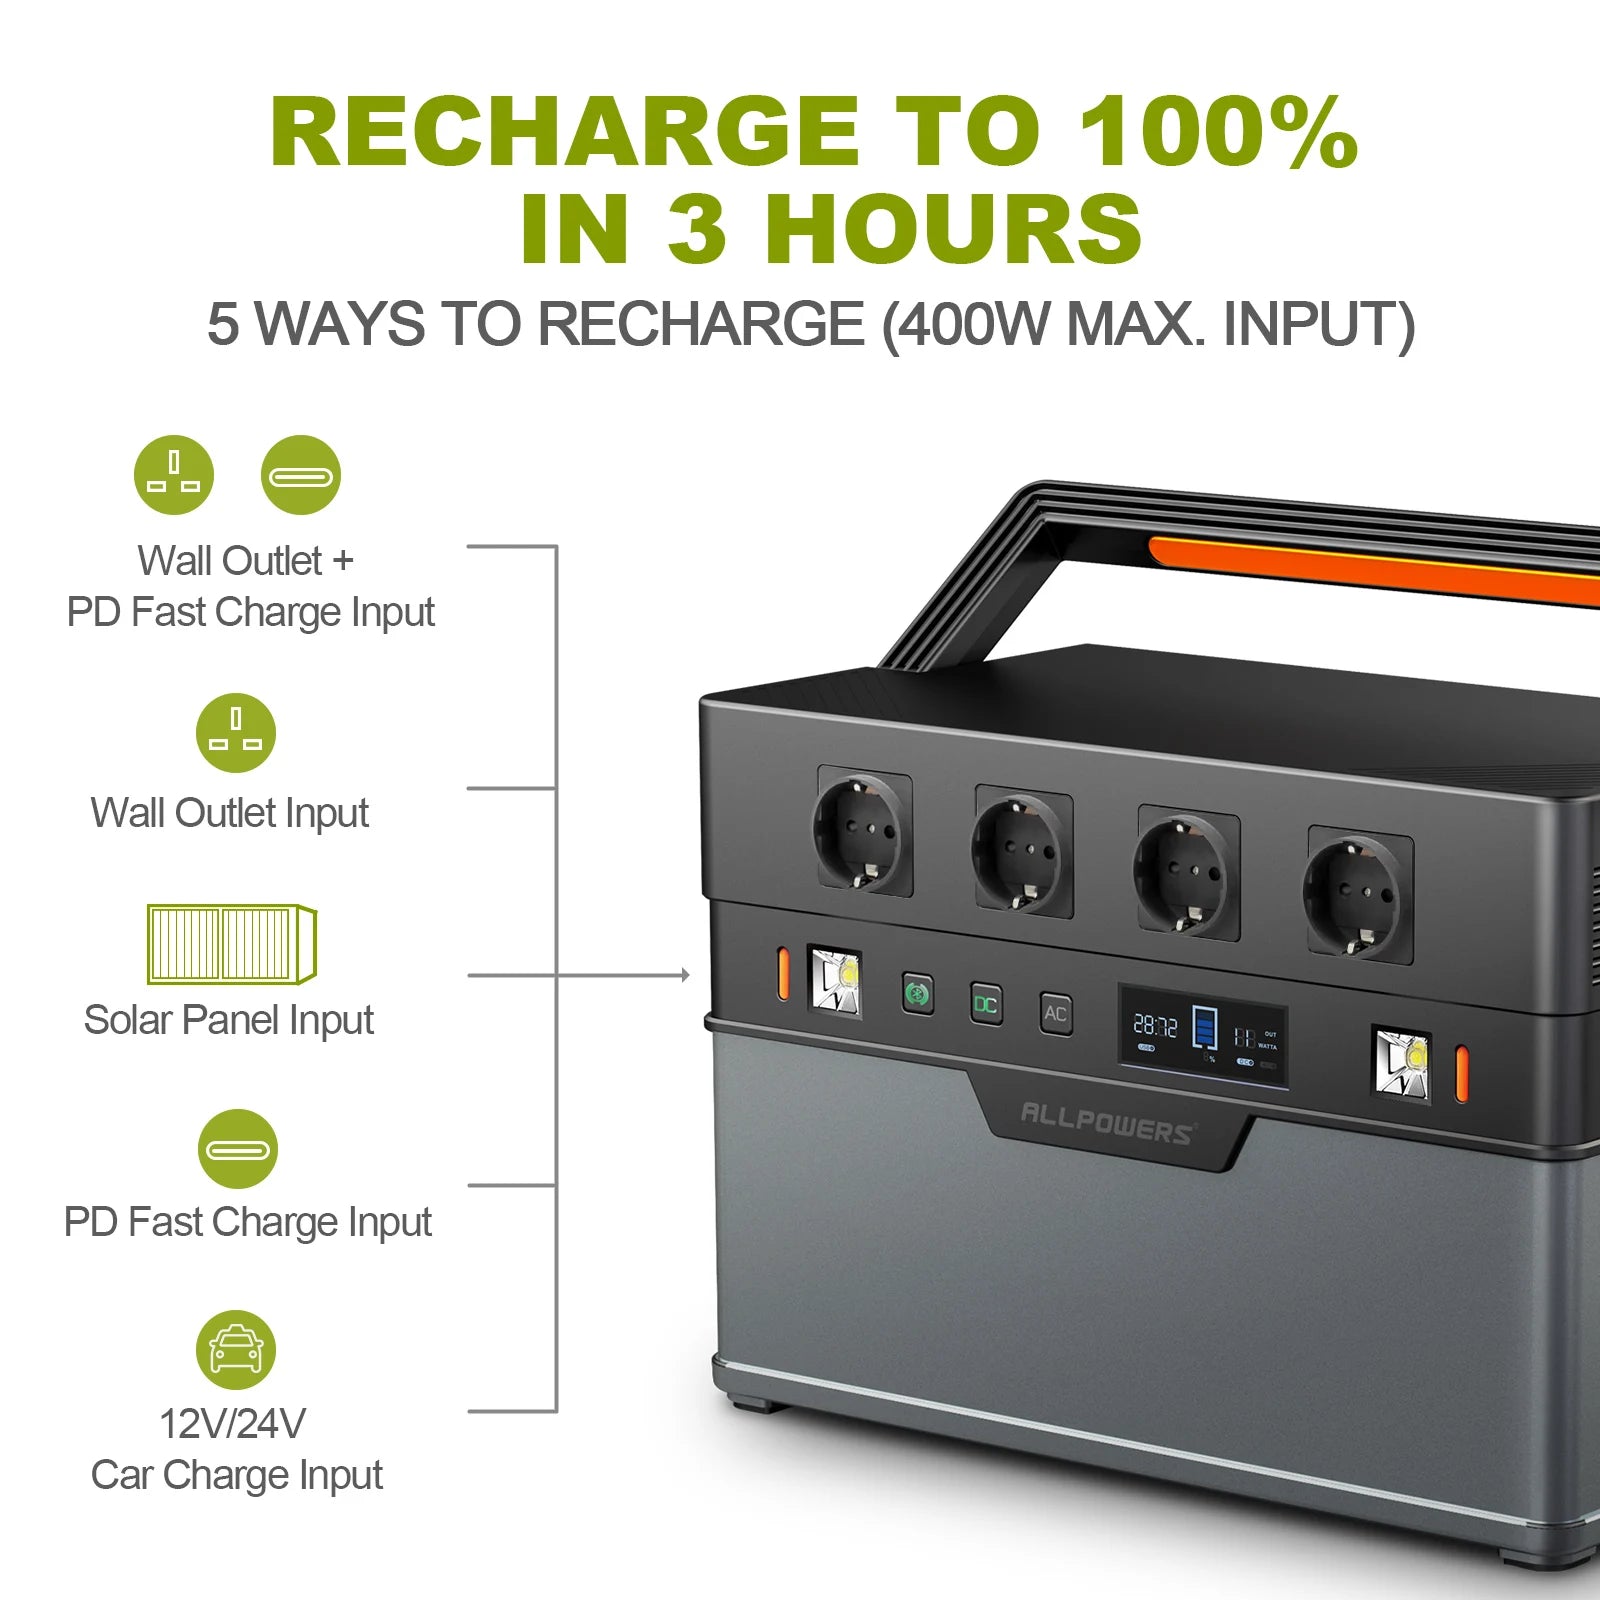 Quickly recharge with various methods: wall outlet, PD fast charging, solar power, or car charging.